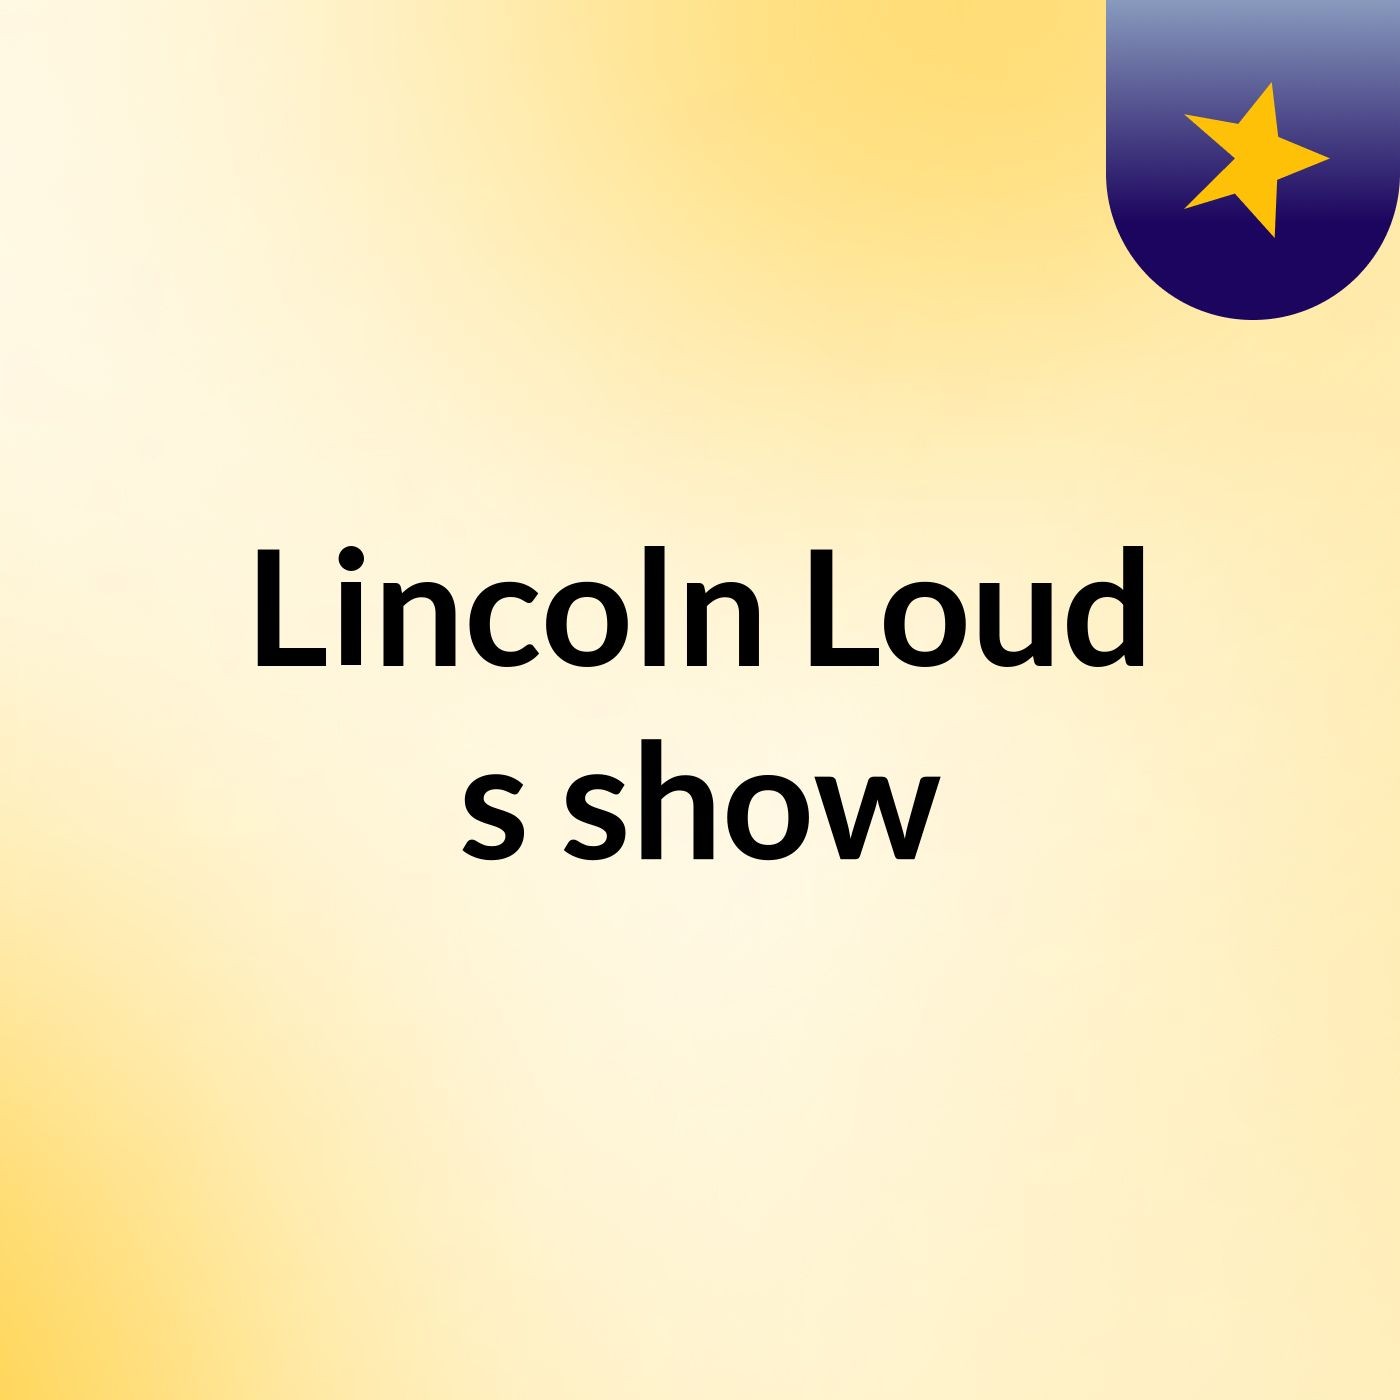 Lincoln Loud's show